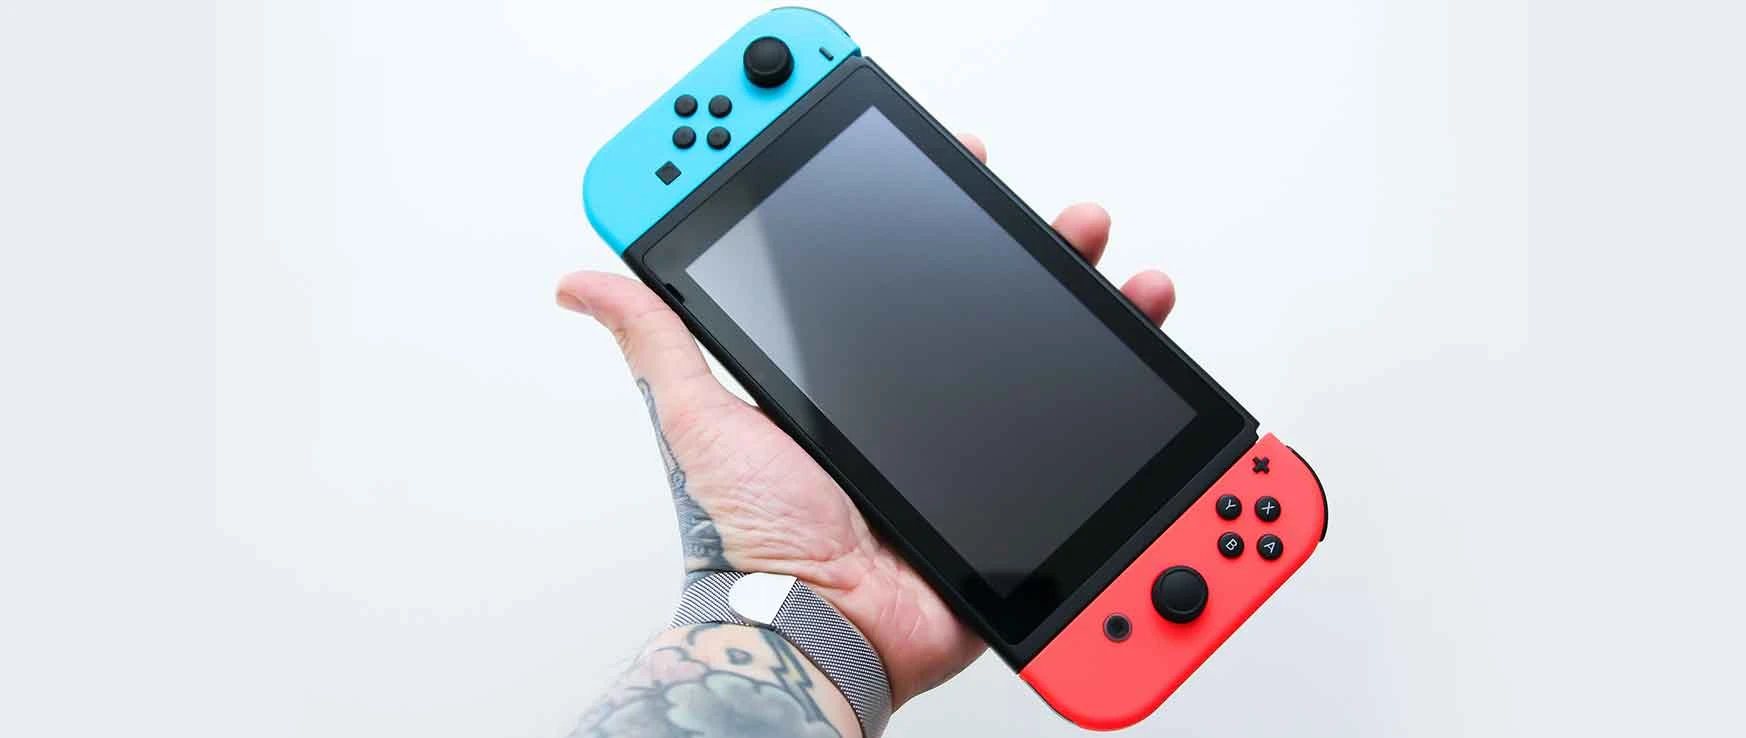 Nintendo Switch tips & tricks: the top 11 things to know